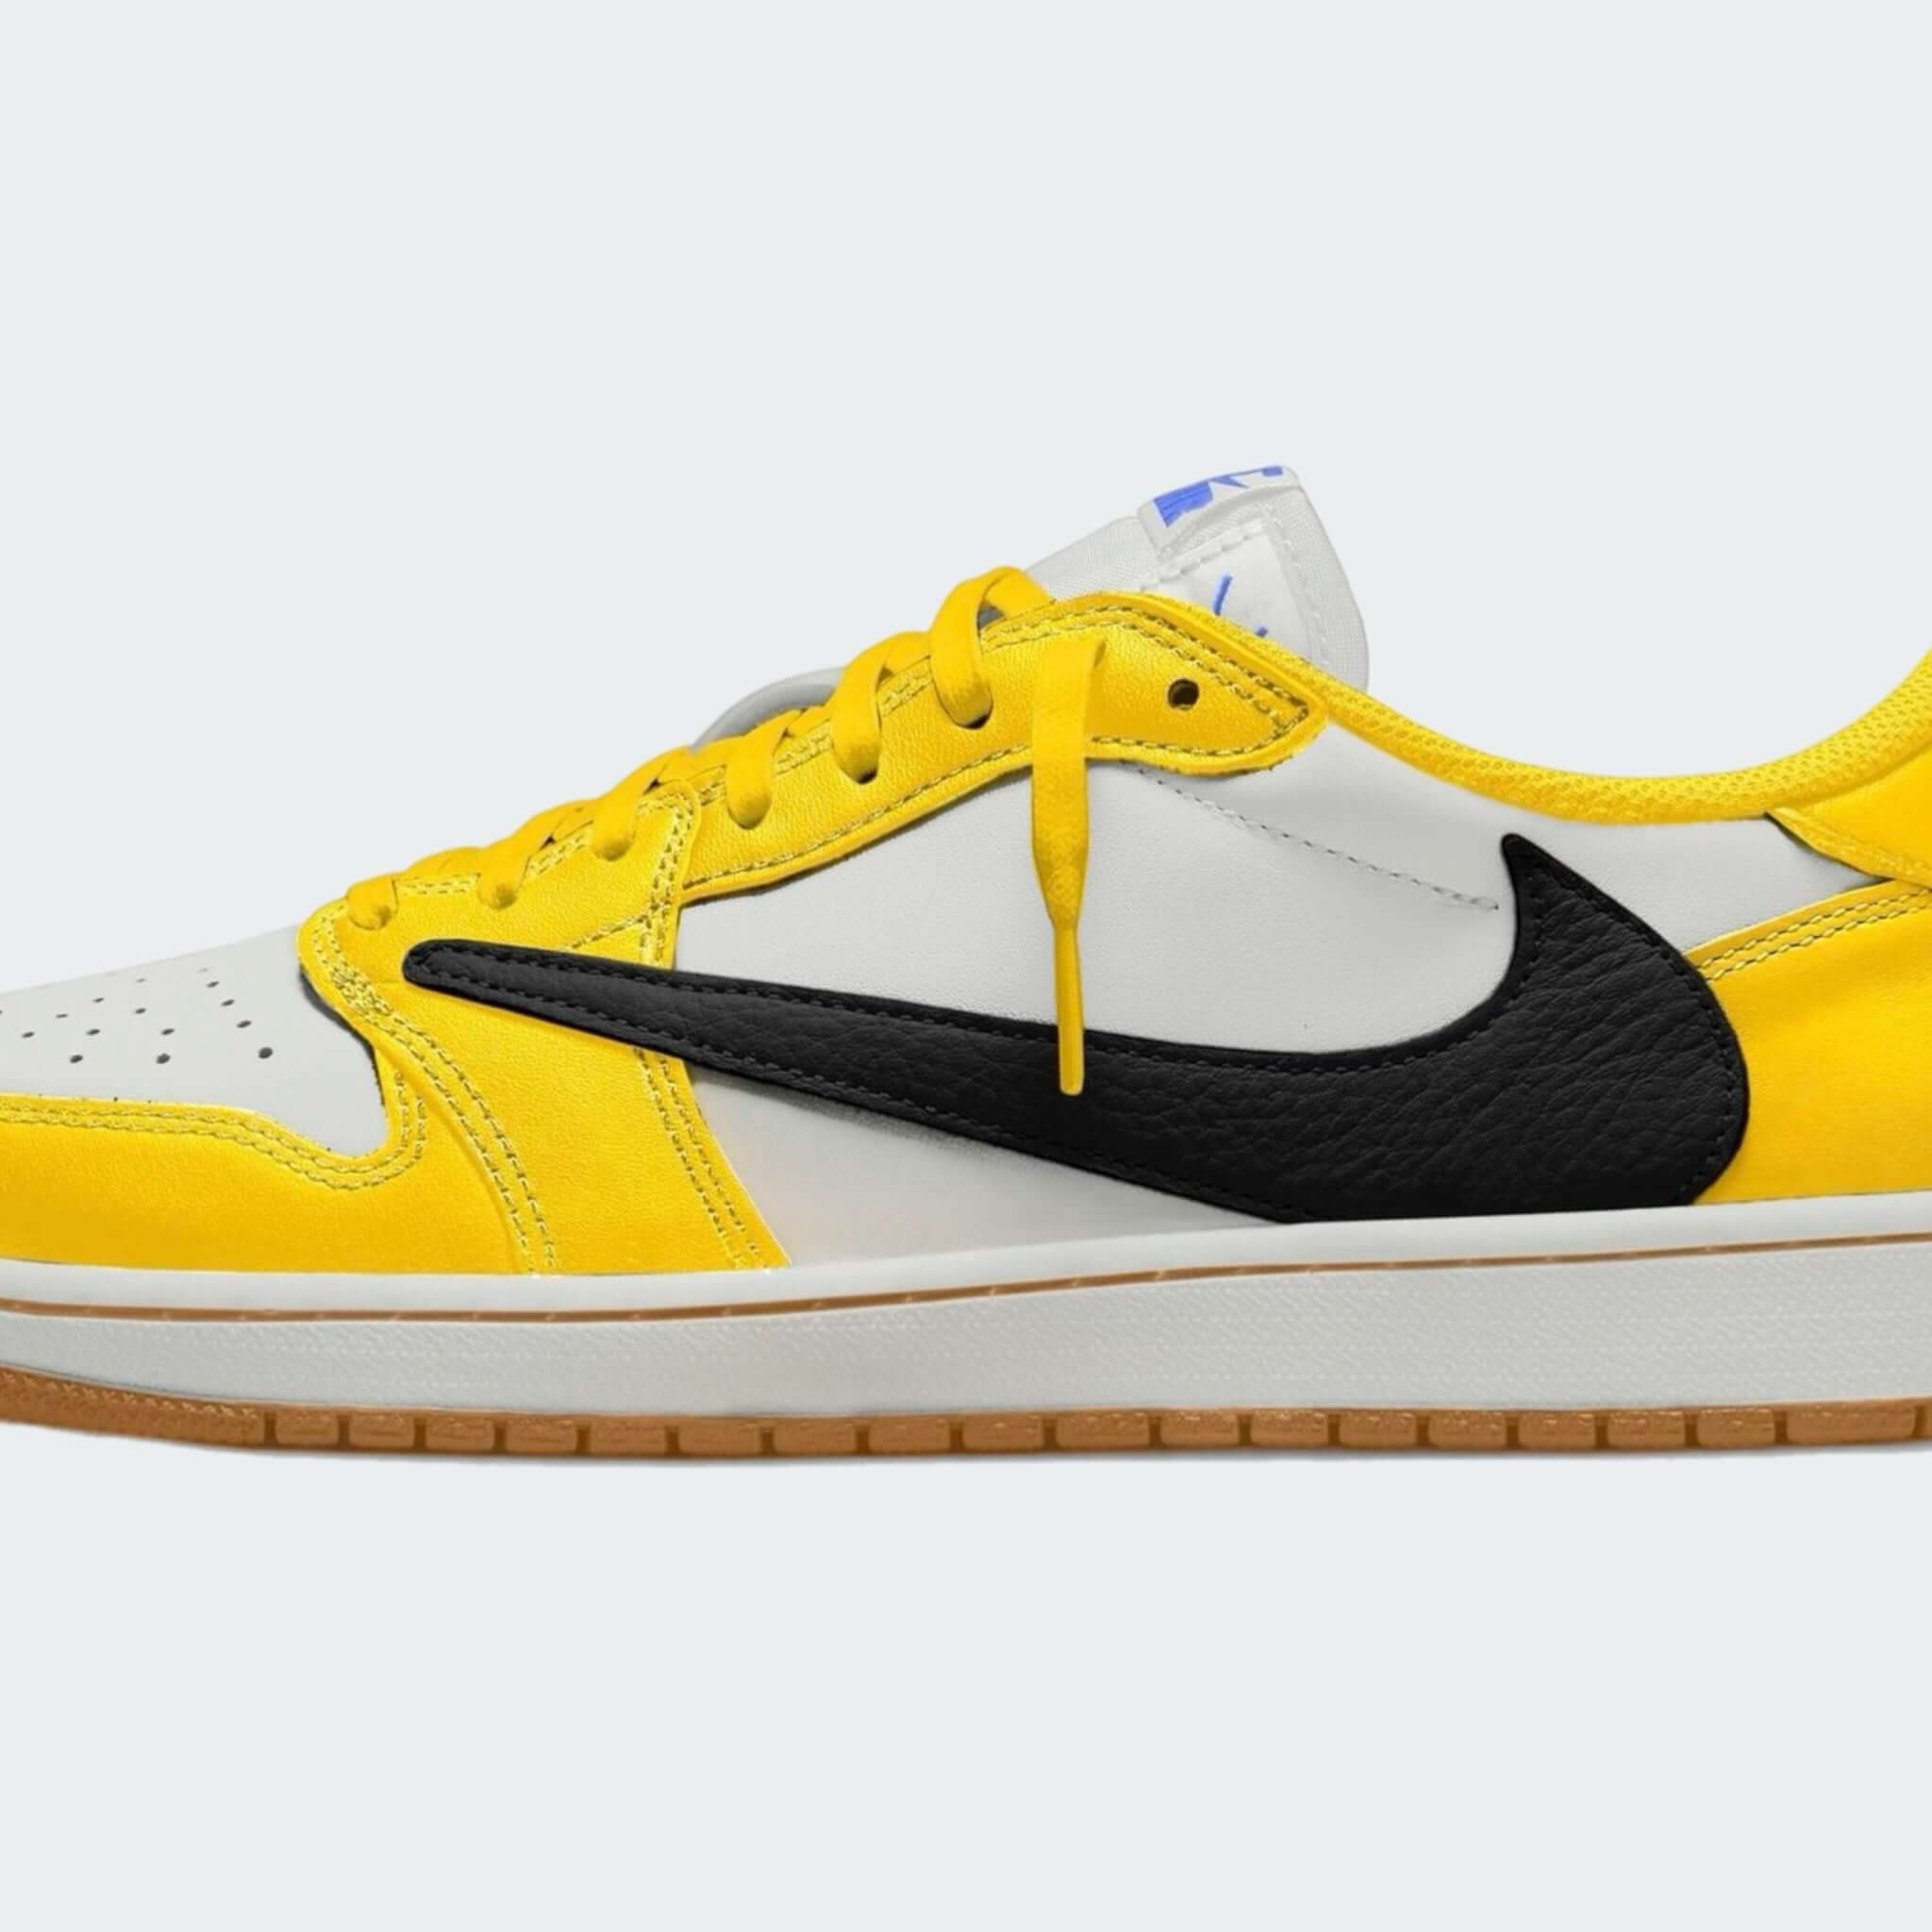 Travis Scott x Air Jordan 1 Low OG (W) "Canary" | | $799.99 | $799.99 | $799.99 | Shoes | Marching Dogs